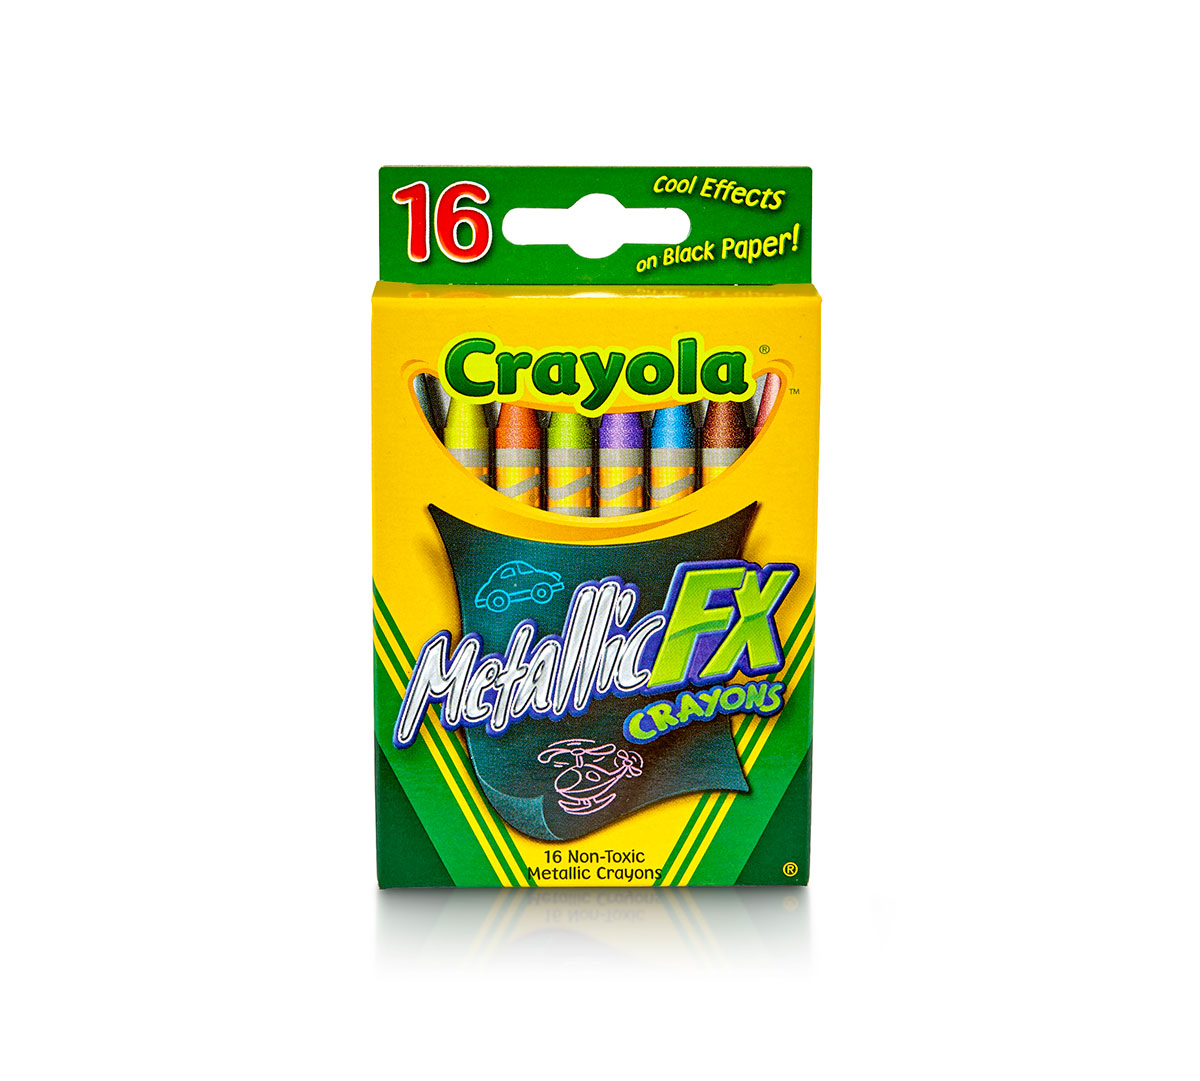 Crayola Glitter Crayons Includes 5 Color Flag Set Metallic FX Crayons Crayons 16 Count 16 Count 24 Count 